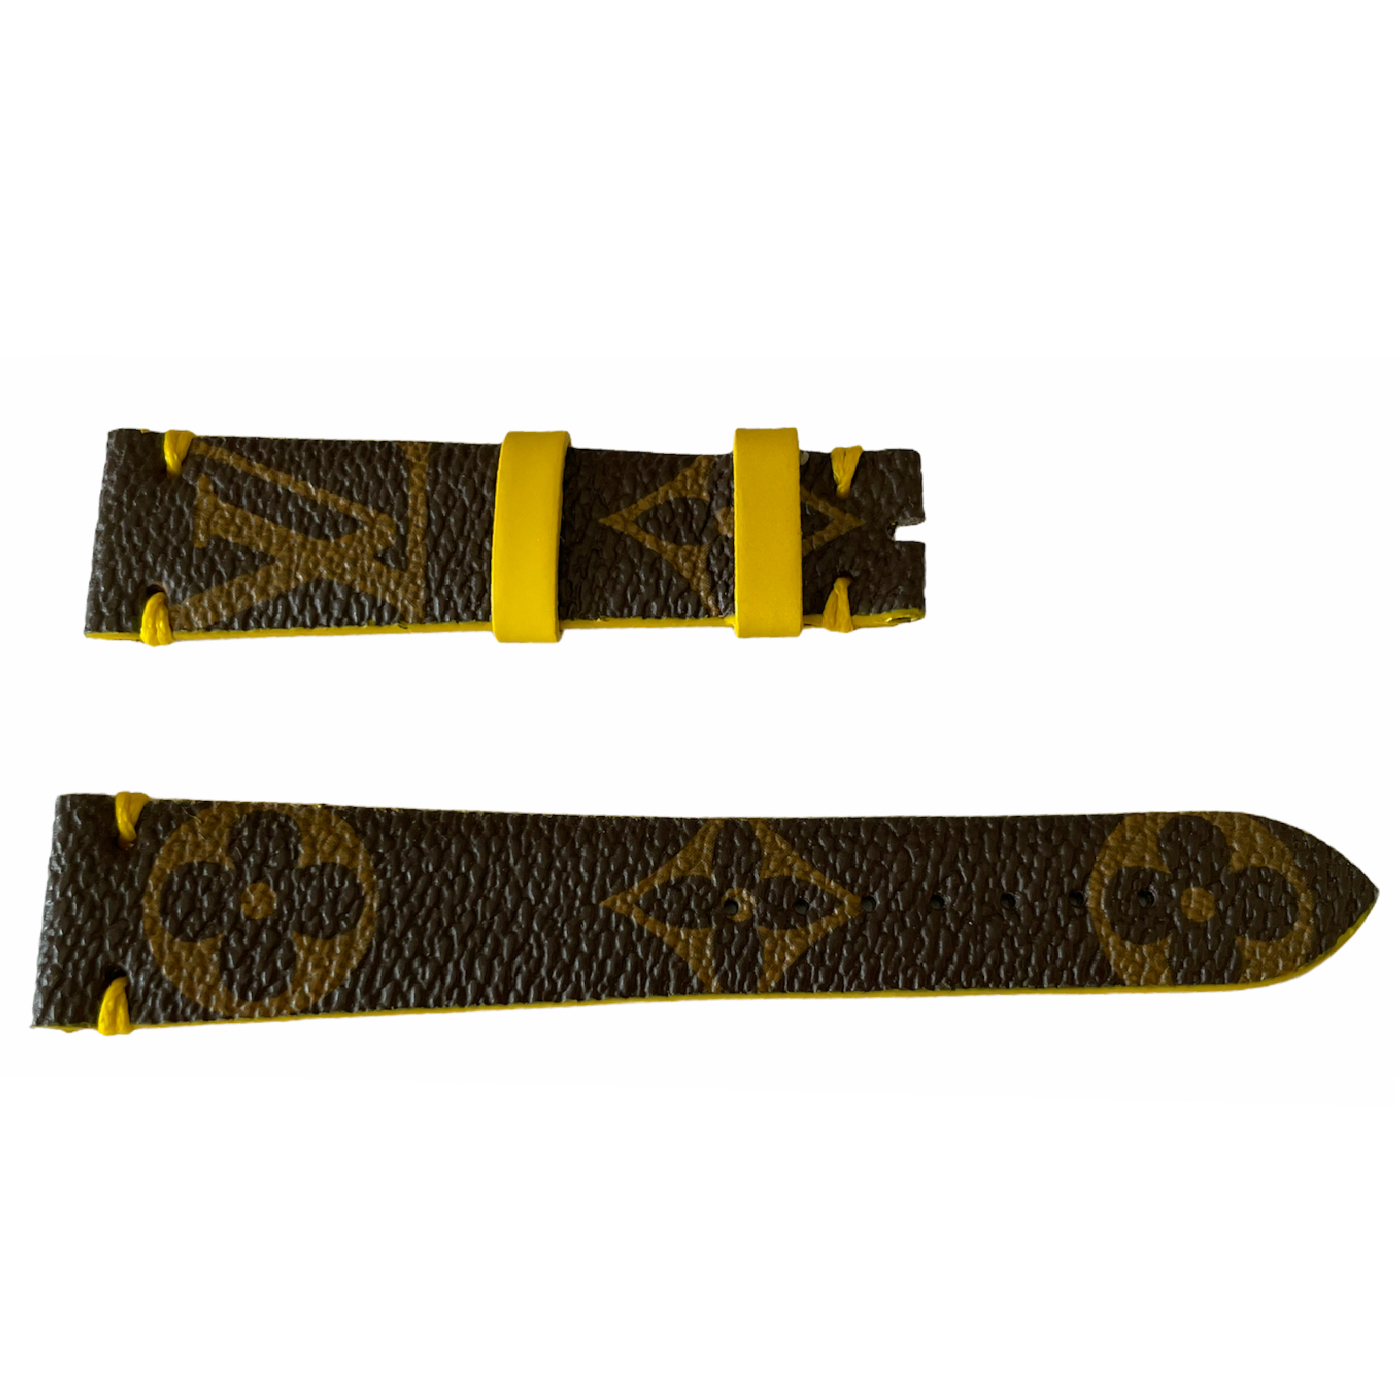 Louis Vuitton Monogram Leather Strap for Watches Brown & Blue 20mm